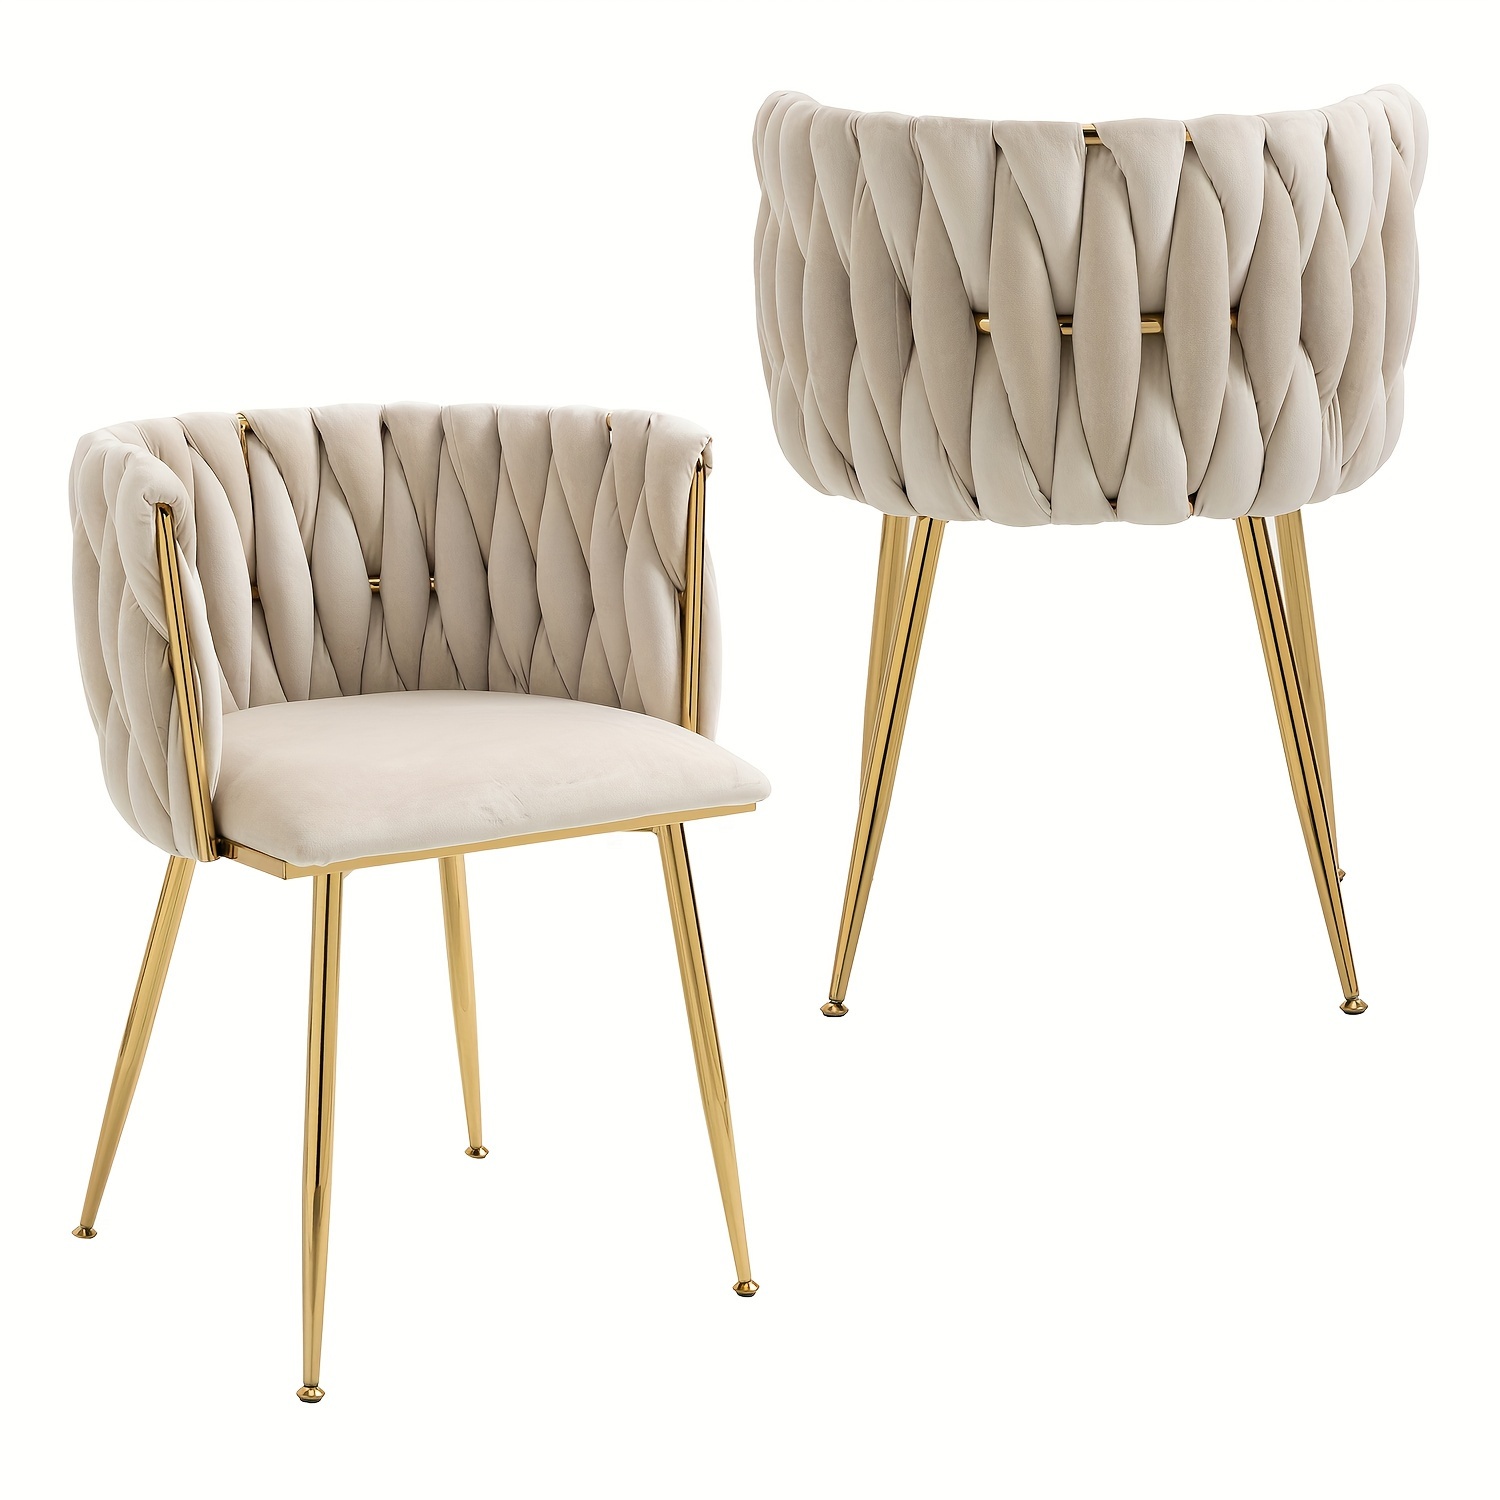 

Velvet Dining Chairs Set Of 2, Woven Upholstered Dining Chairs With Gold Metal Legs, Modern Accent Chairs For Living Room, Dining Room, Kitchen